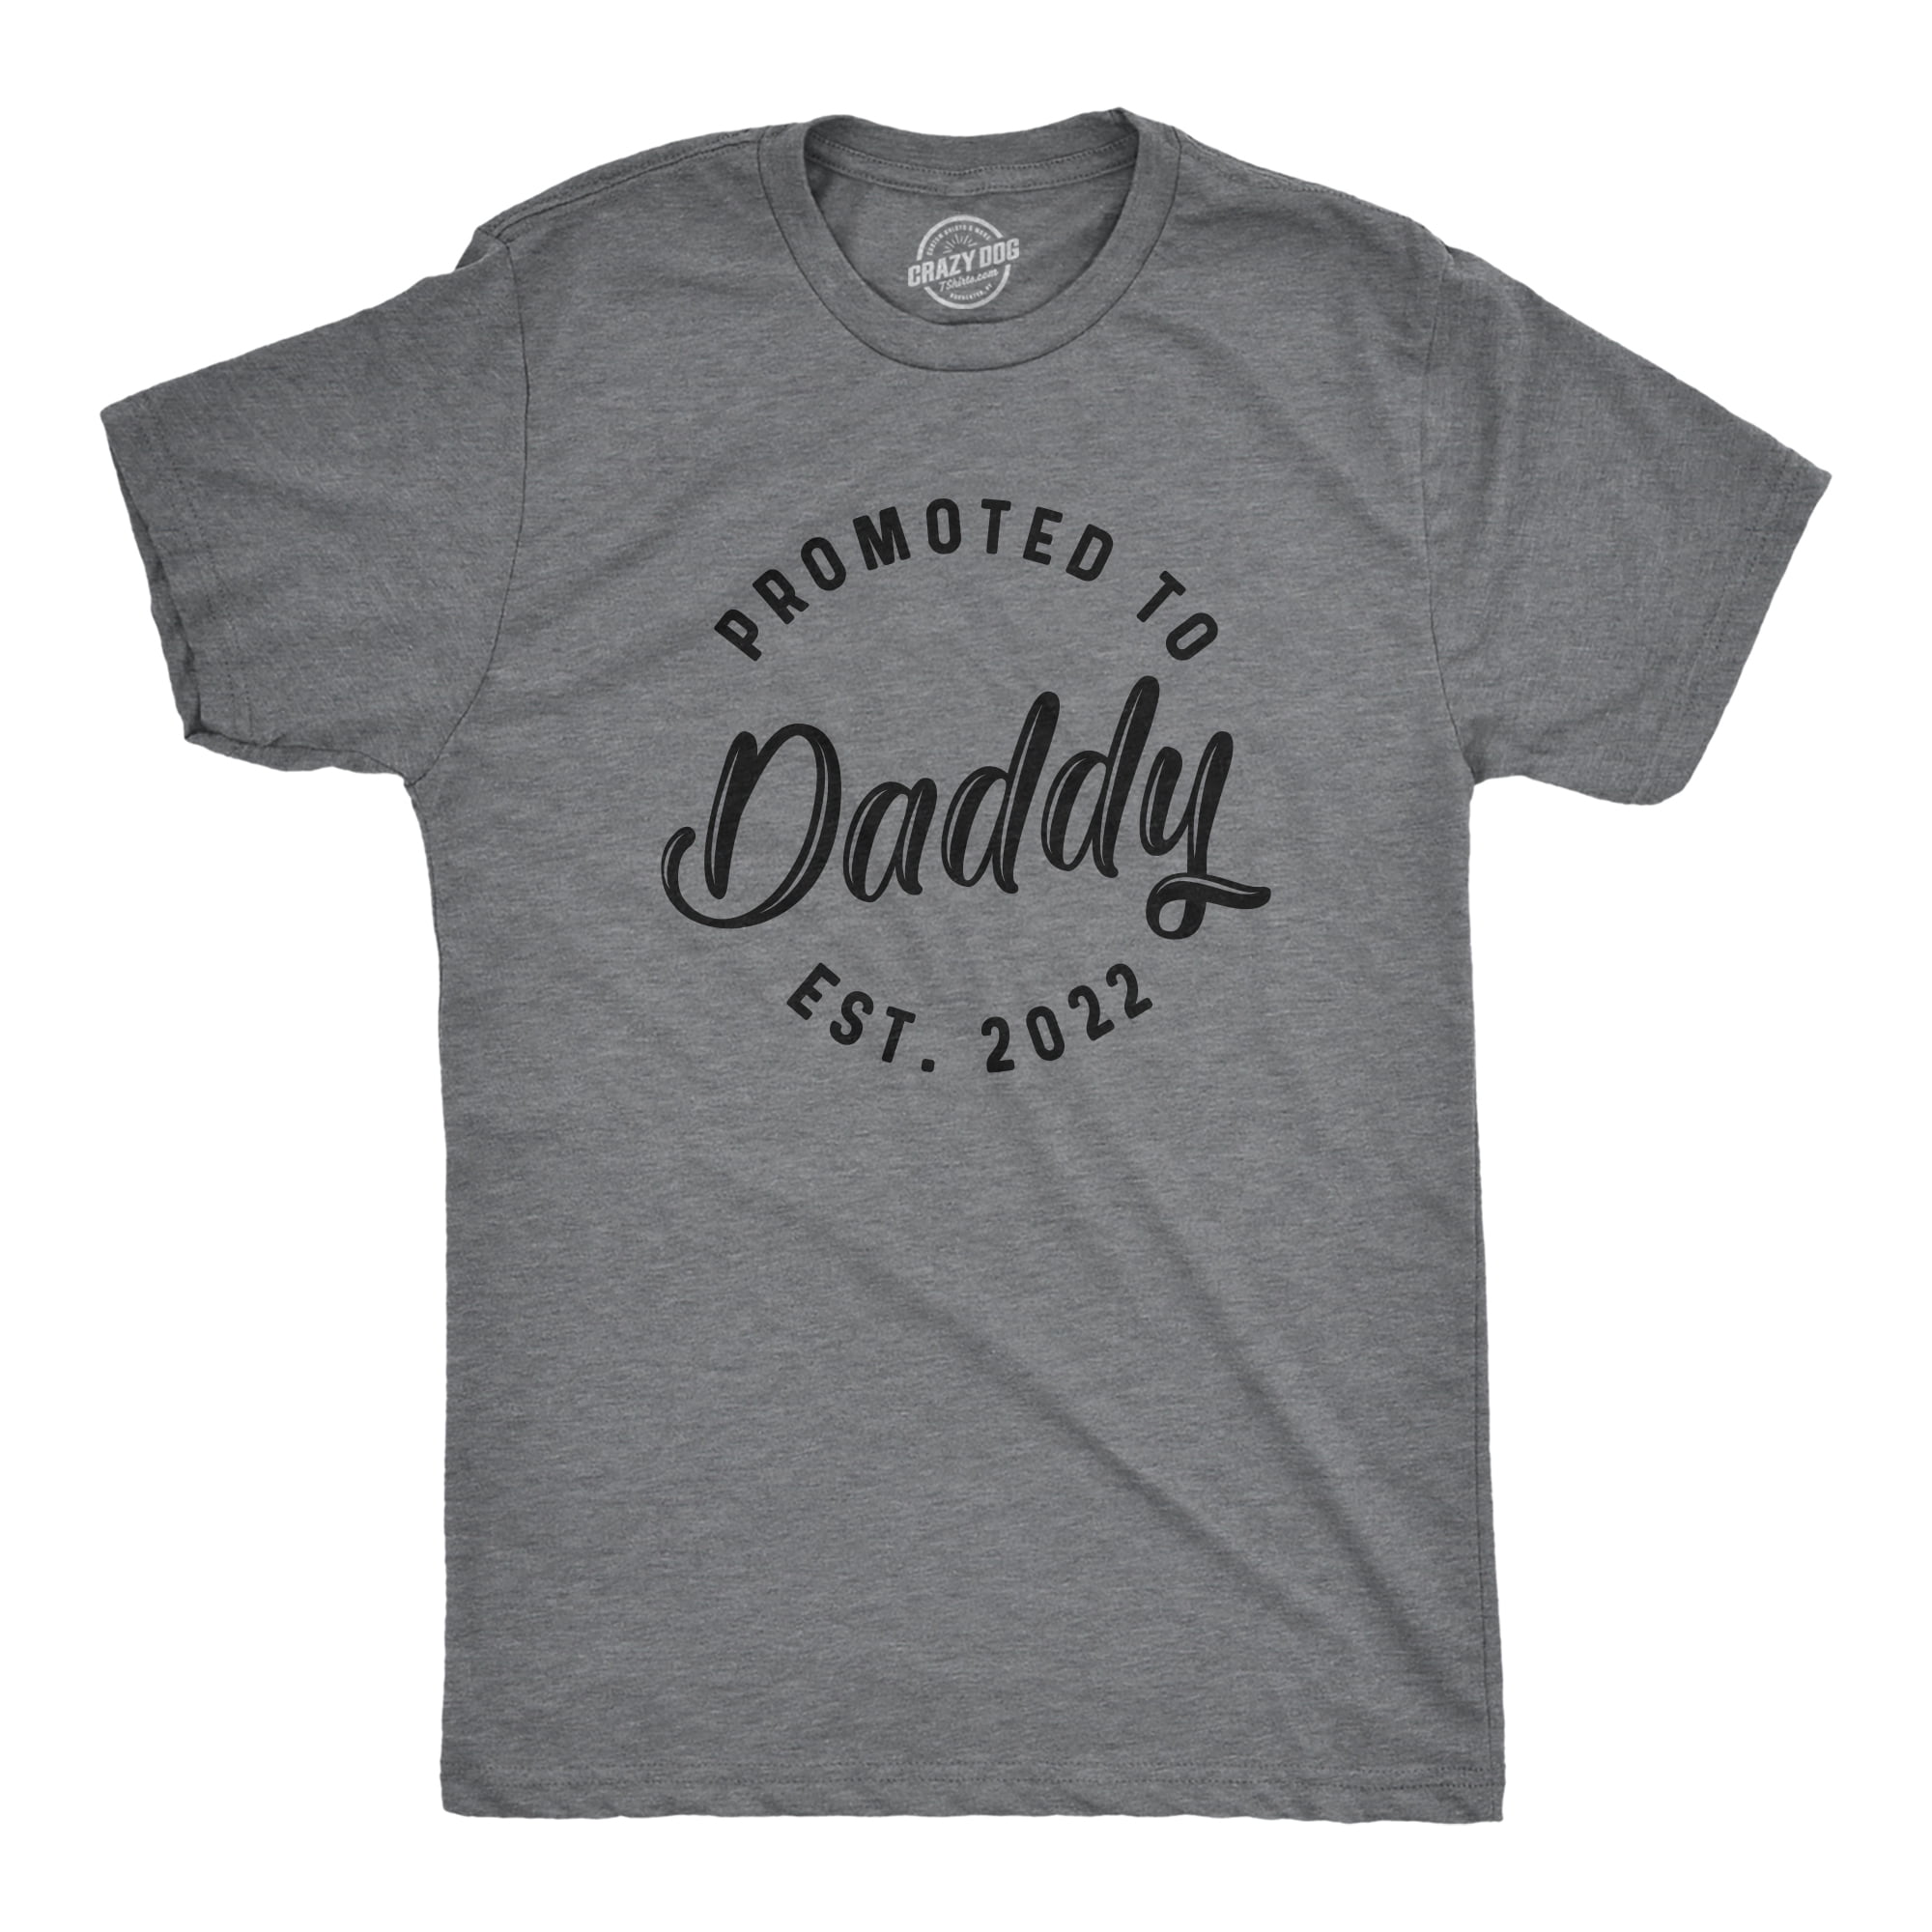 Funny T-Shirt 2019 PROMOTED TO DADDY EST Slogan Tee Offensive